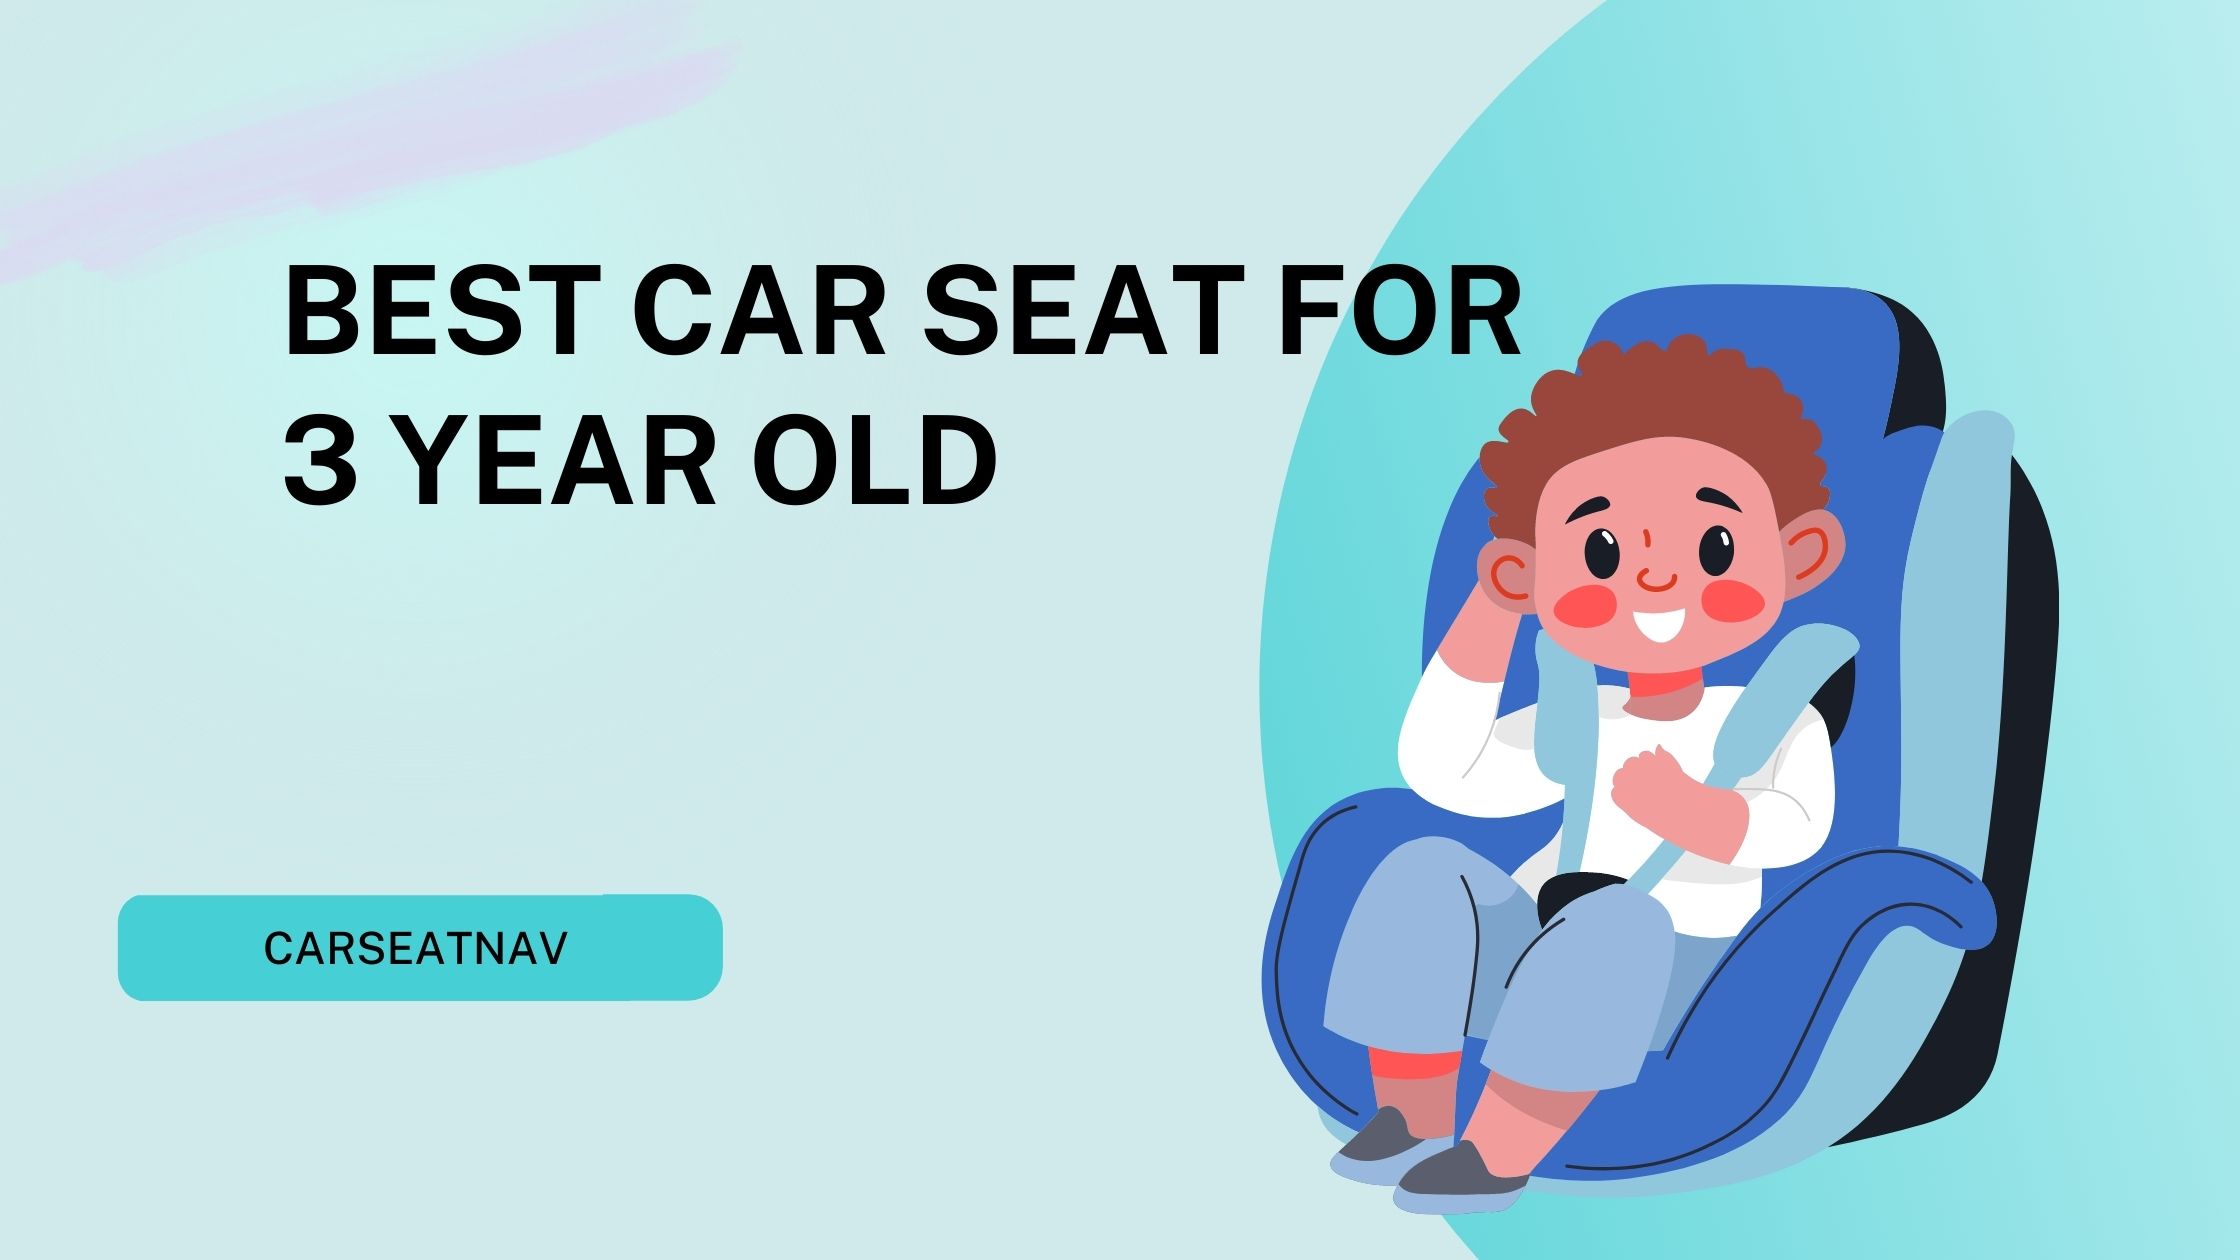 best car seat for 3 year old - carseatnav